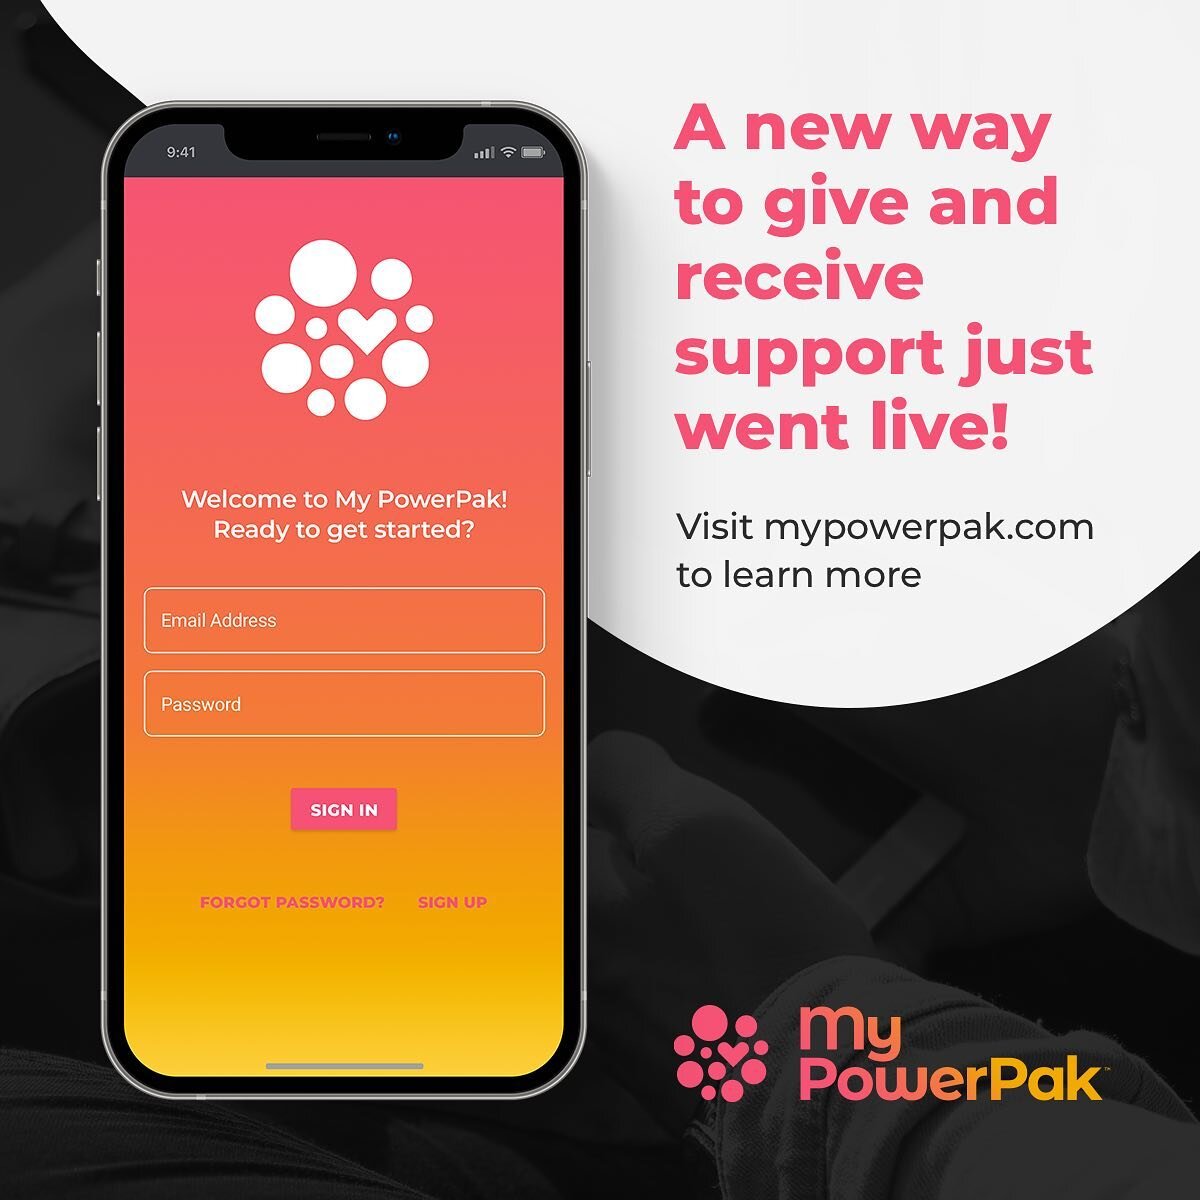 We are very excited to share that we have launched a new and fully-featured website at www.mypowerpak.com (link in bio), and released the Beta version of the My PowerPak app to the public. This marks the true beginning of our mission: helping empower